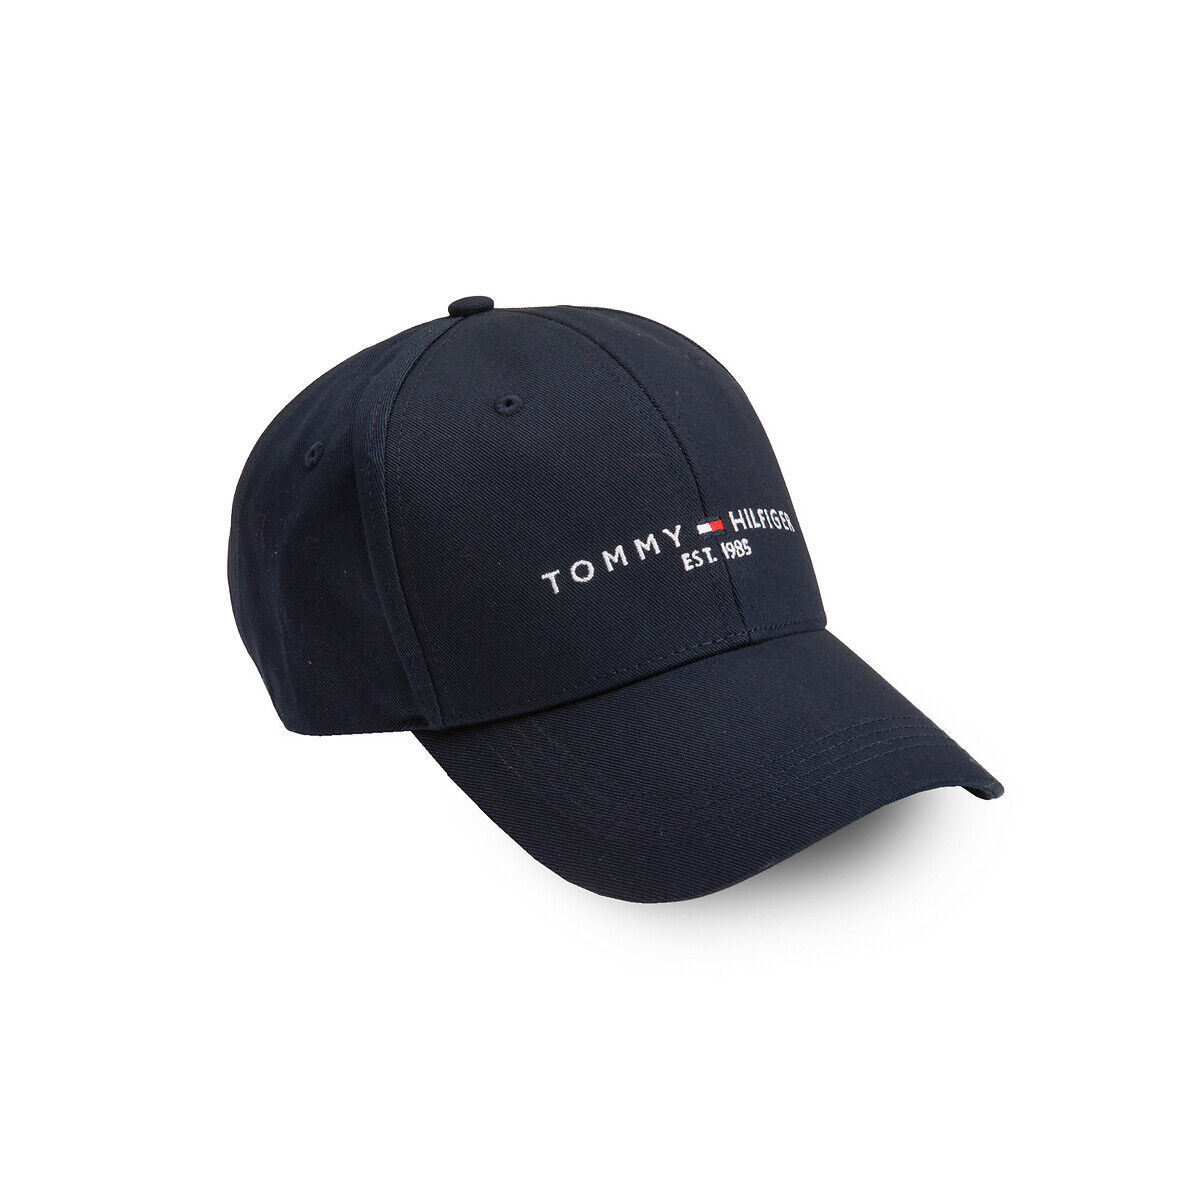 TOMMY HILFIGER Casquette